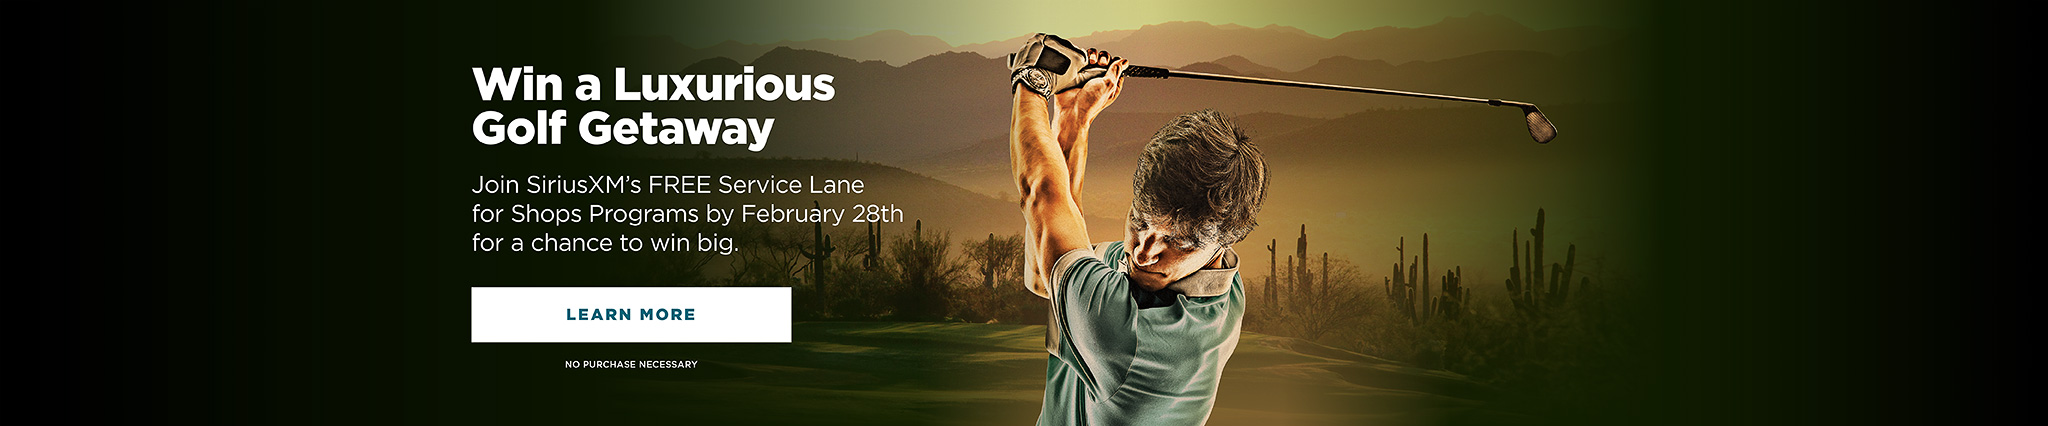 Join SiriusXM's FREE Serivce Lane for Shops Program by February 28, 2022 for a chance to win a luxurious golf getaway.